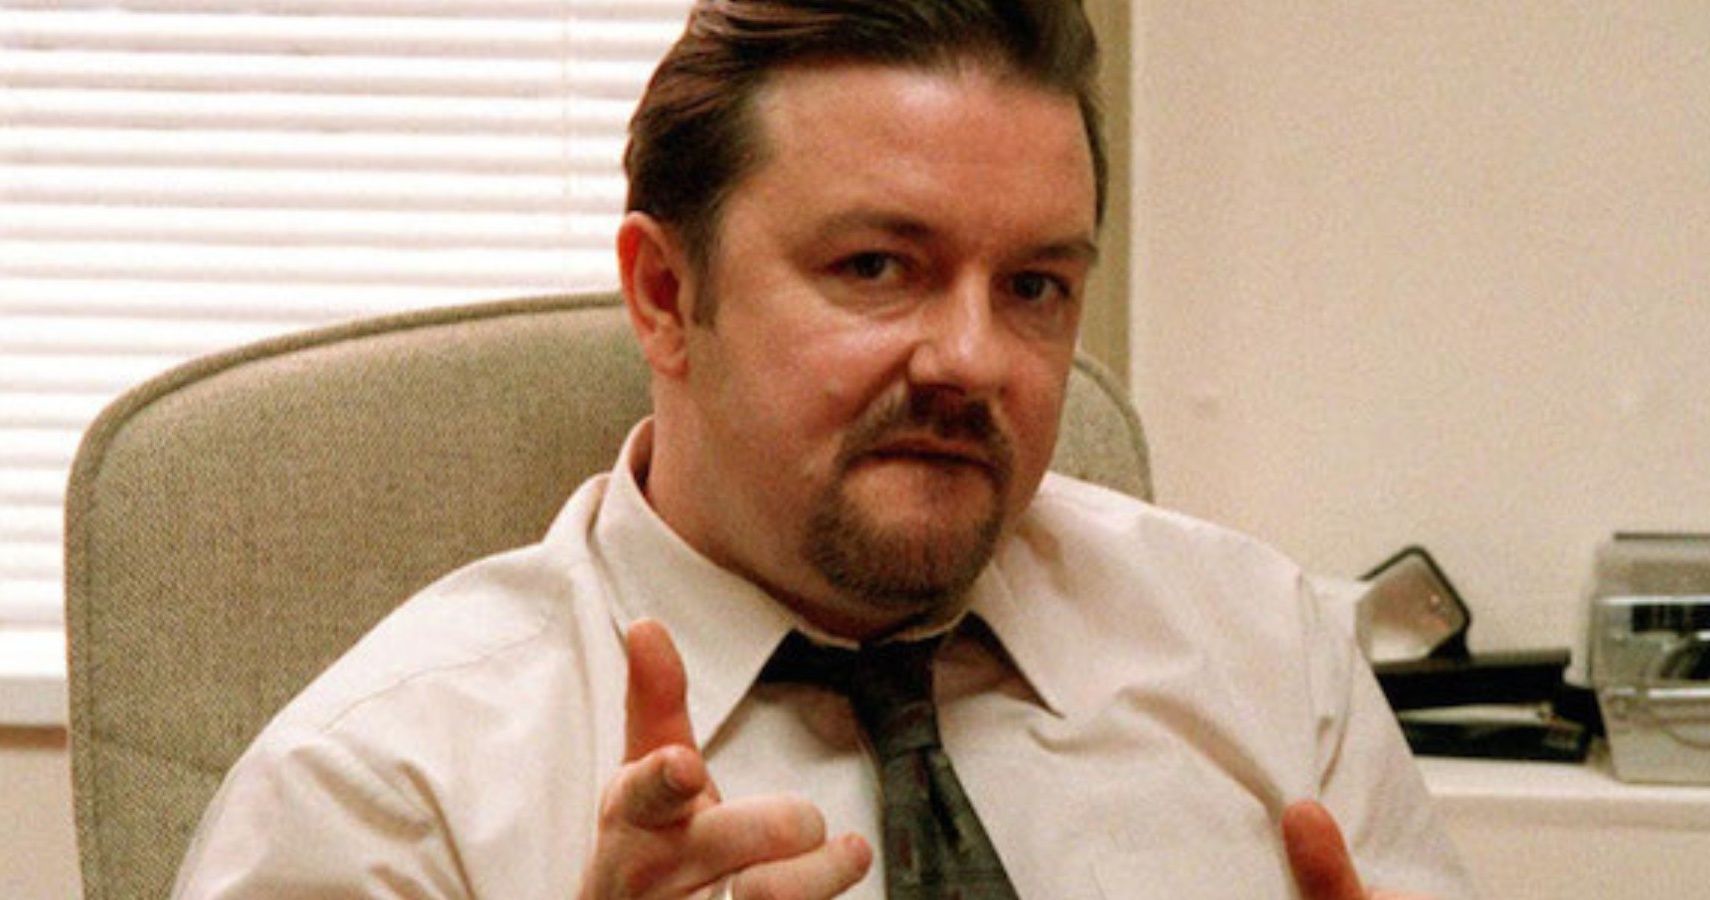 Ricky Gervais His 10 Best Roles, Ranked According To Rotten Tomatoes